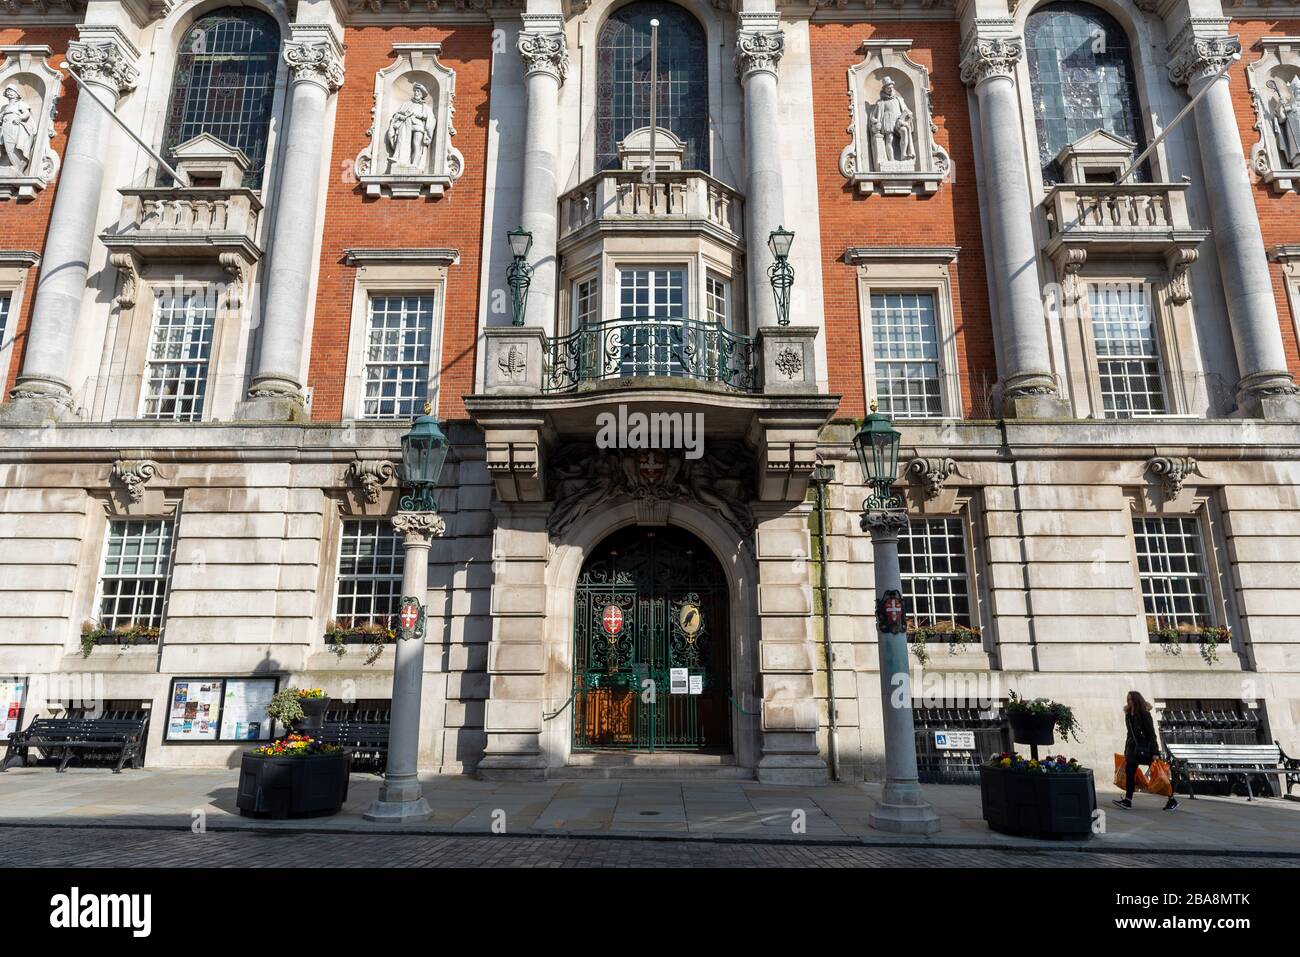 Colchester Town Hall closed for business during Covid-19 Coronovirus pandemic social distancing measures, Colchester, UK, 26th March 2020 Stock Photo